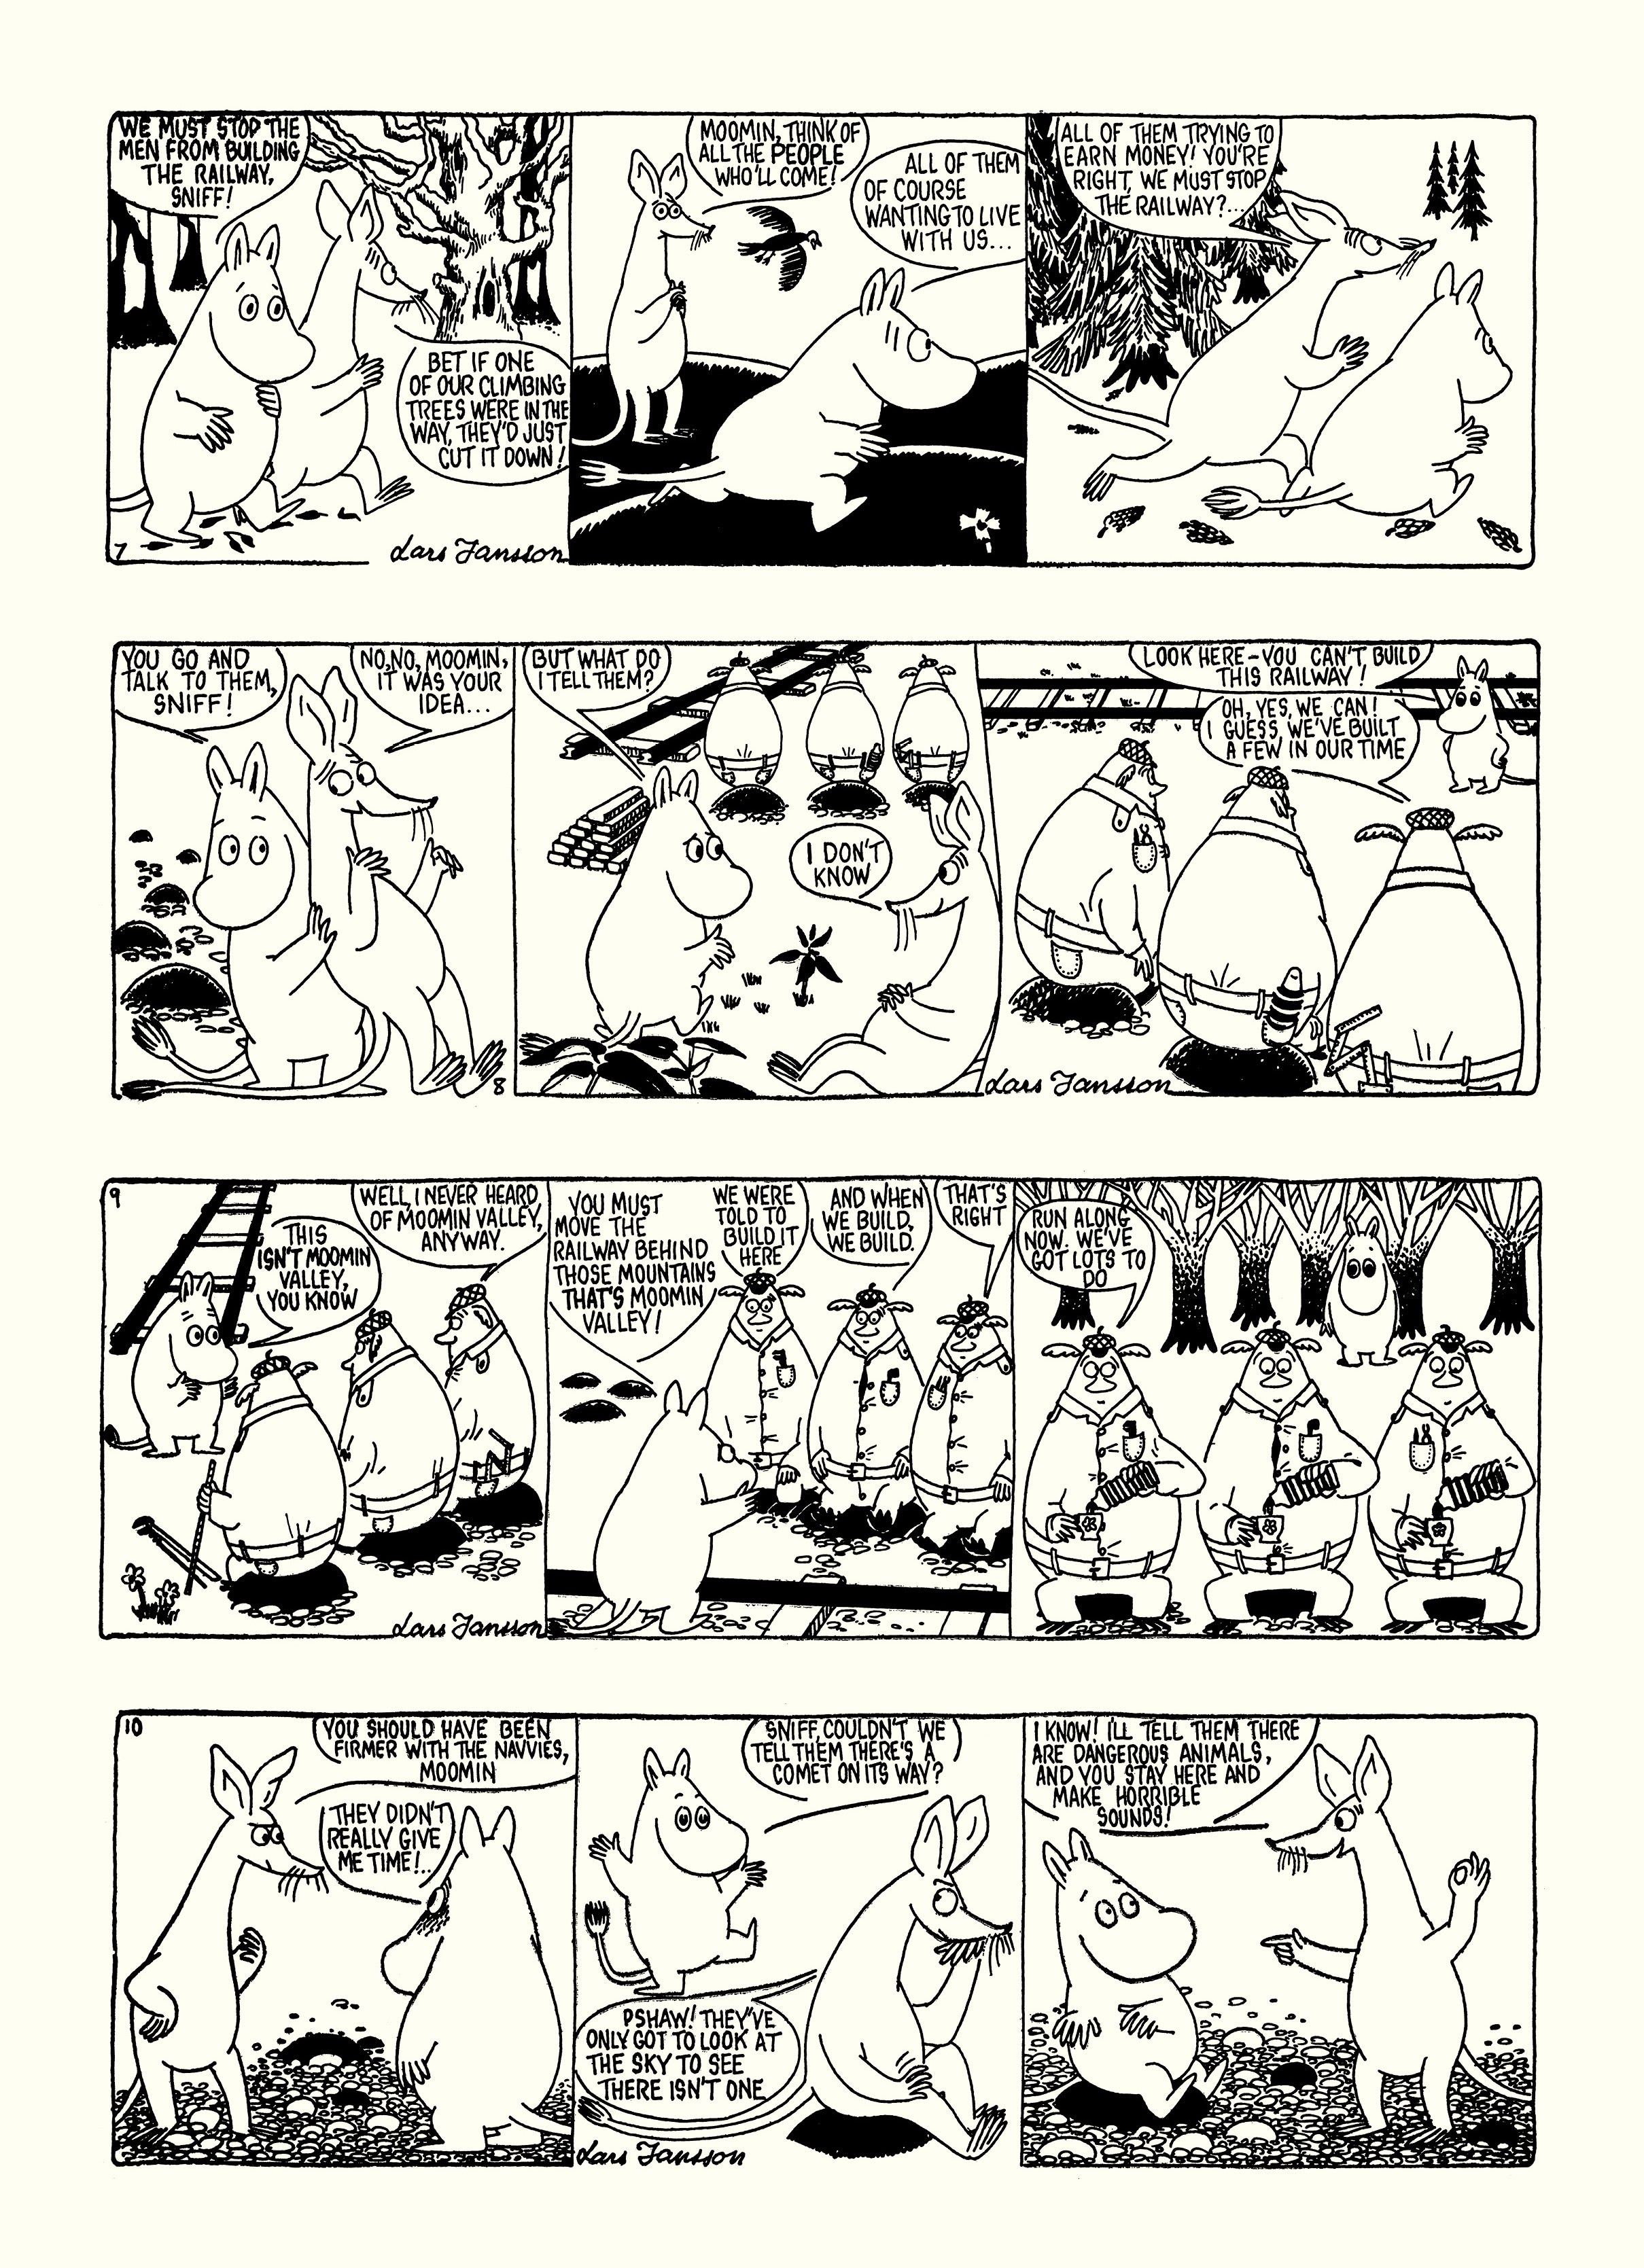 Read online Moomin: The Complete Lars Jansson Comic Strip comic -  Issue # TPB 6 - 28